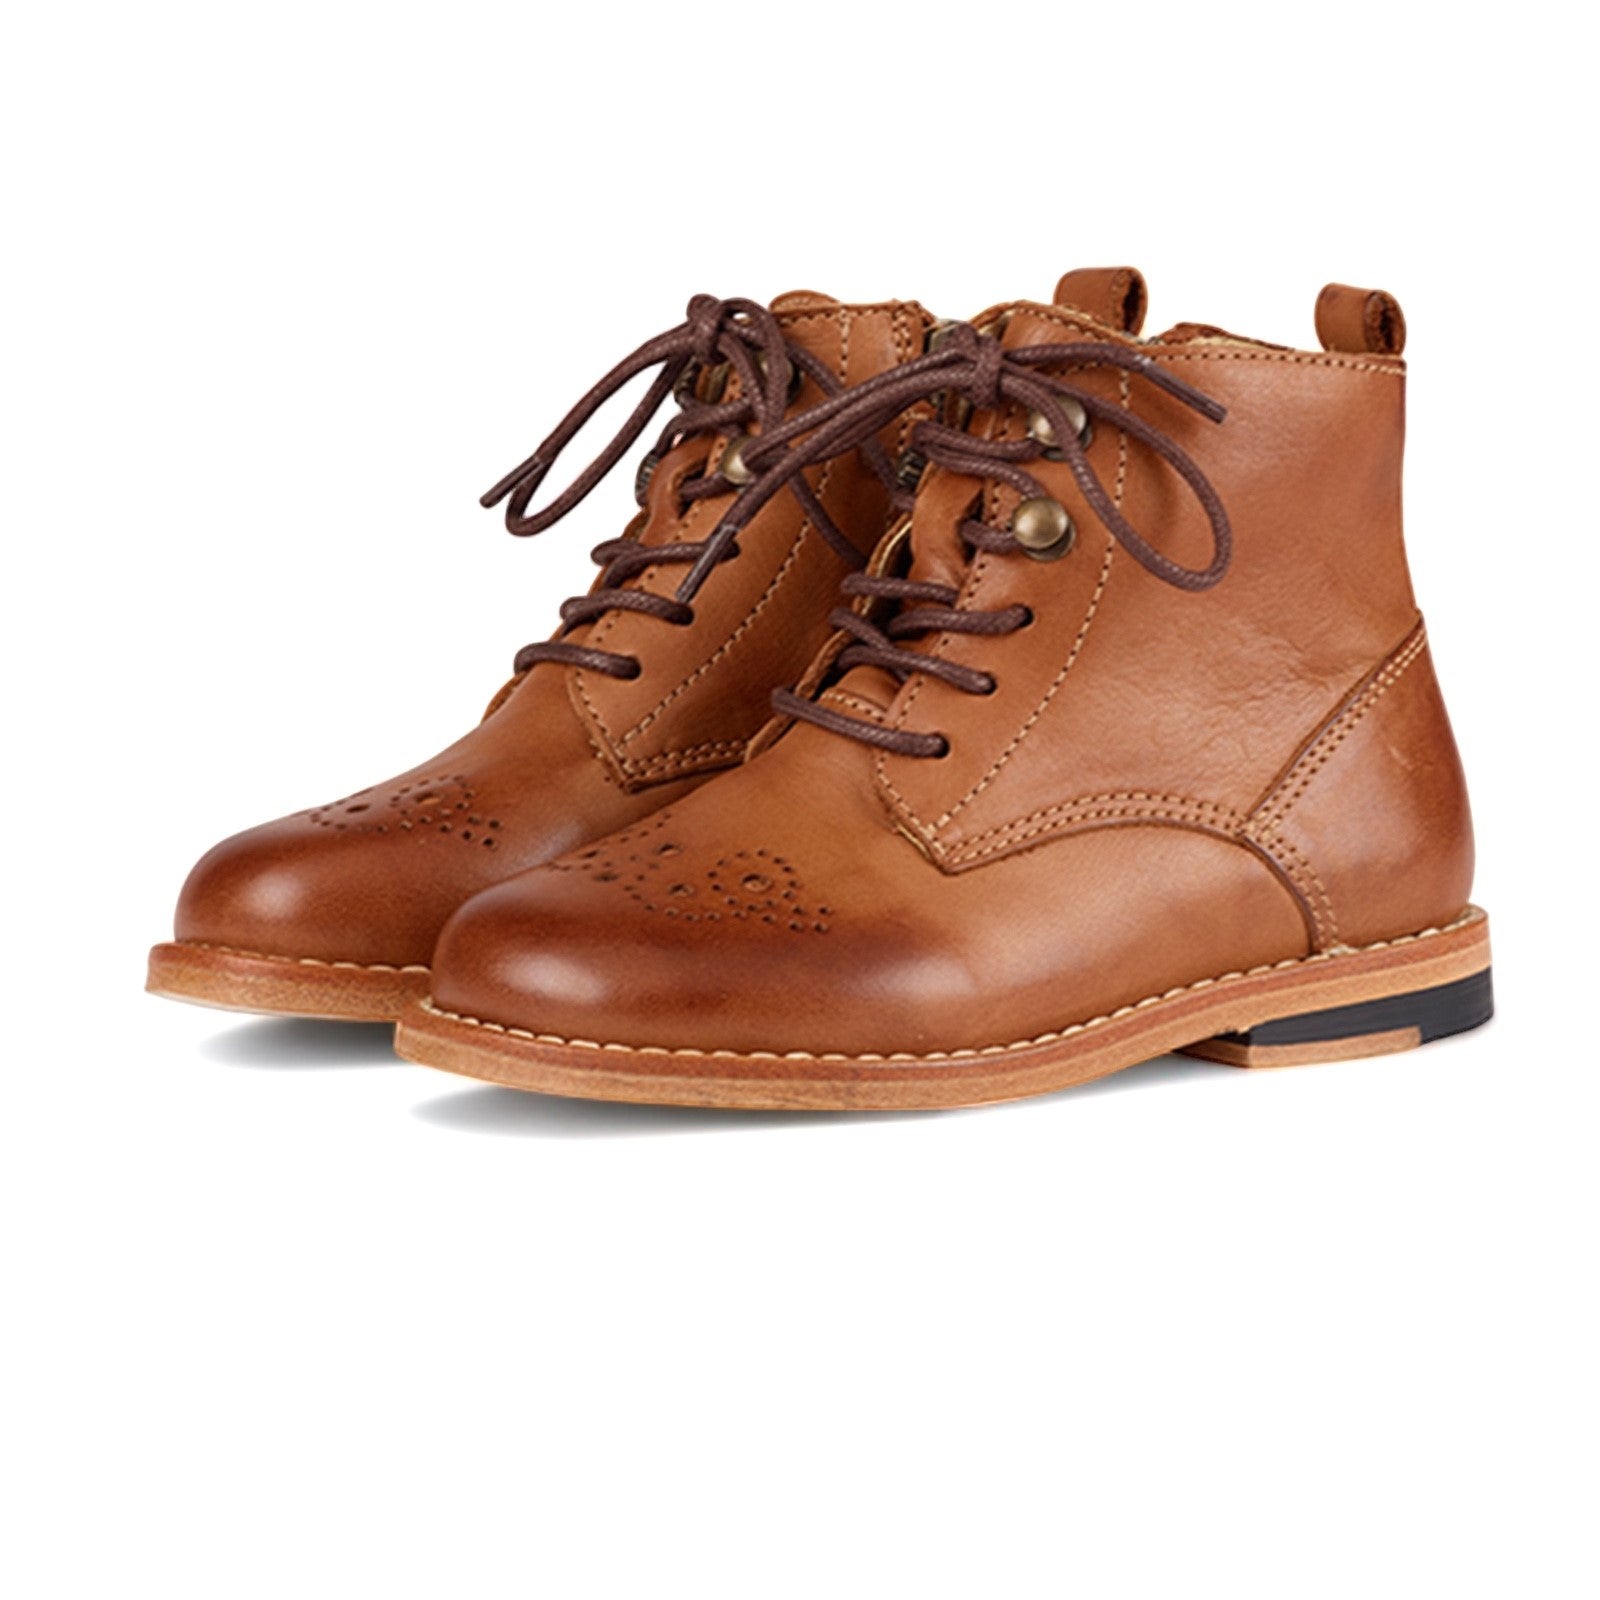 Young Soles Buster Brogue Tan Burnished Leather Boots